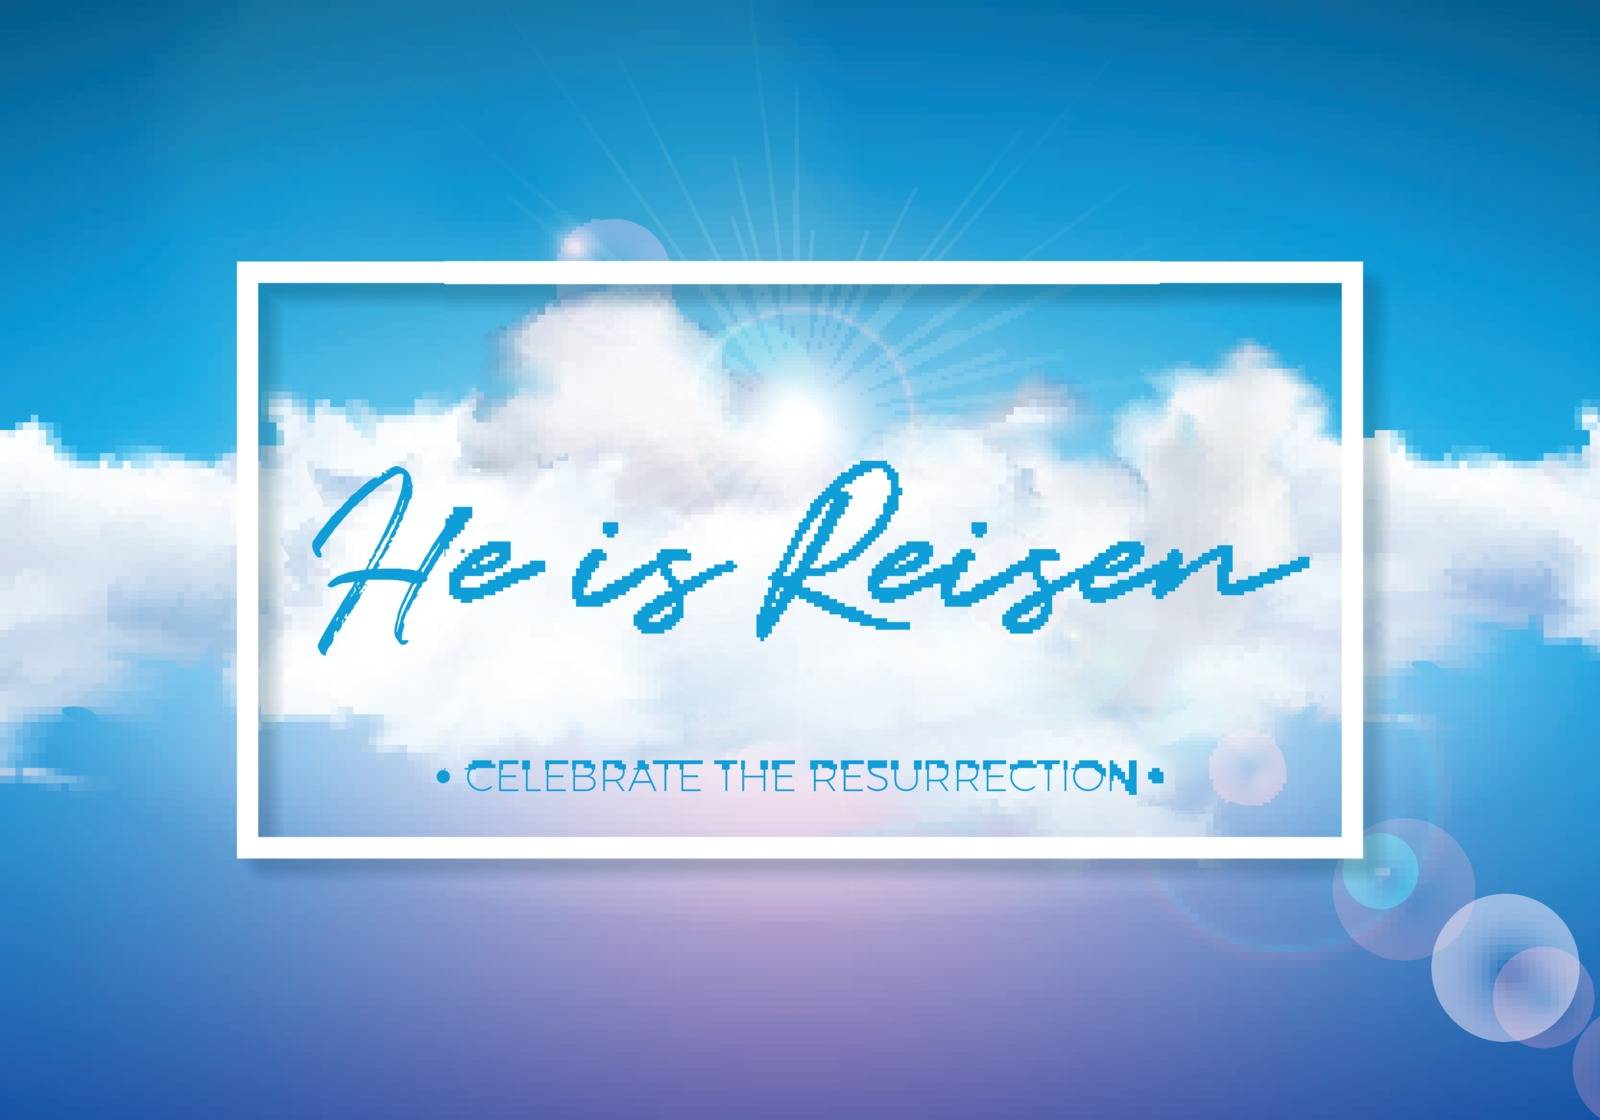 Easter Holiday illustration with cloud on blue sky background. He is risen. Vector Christian religious design for resurrection celebrate theme